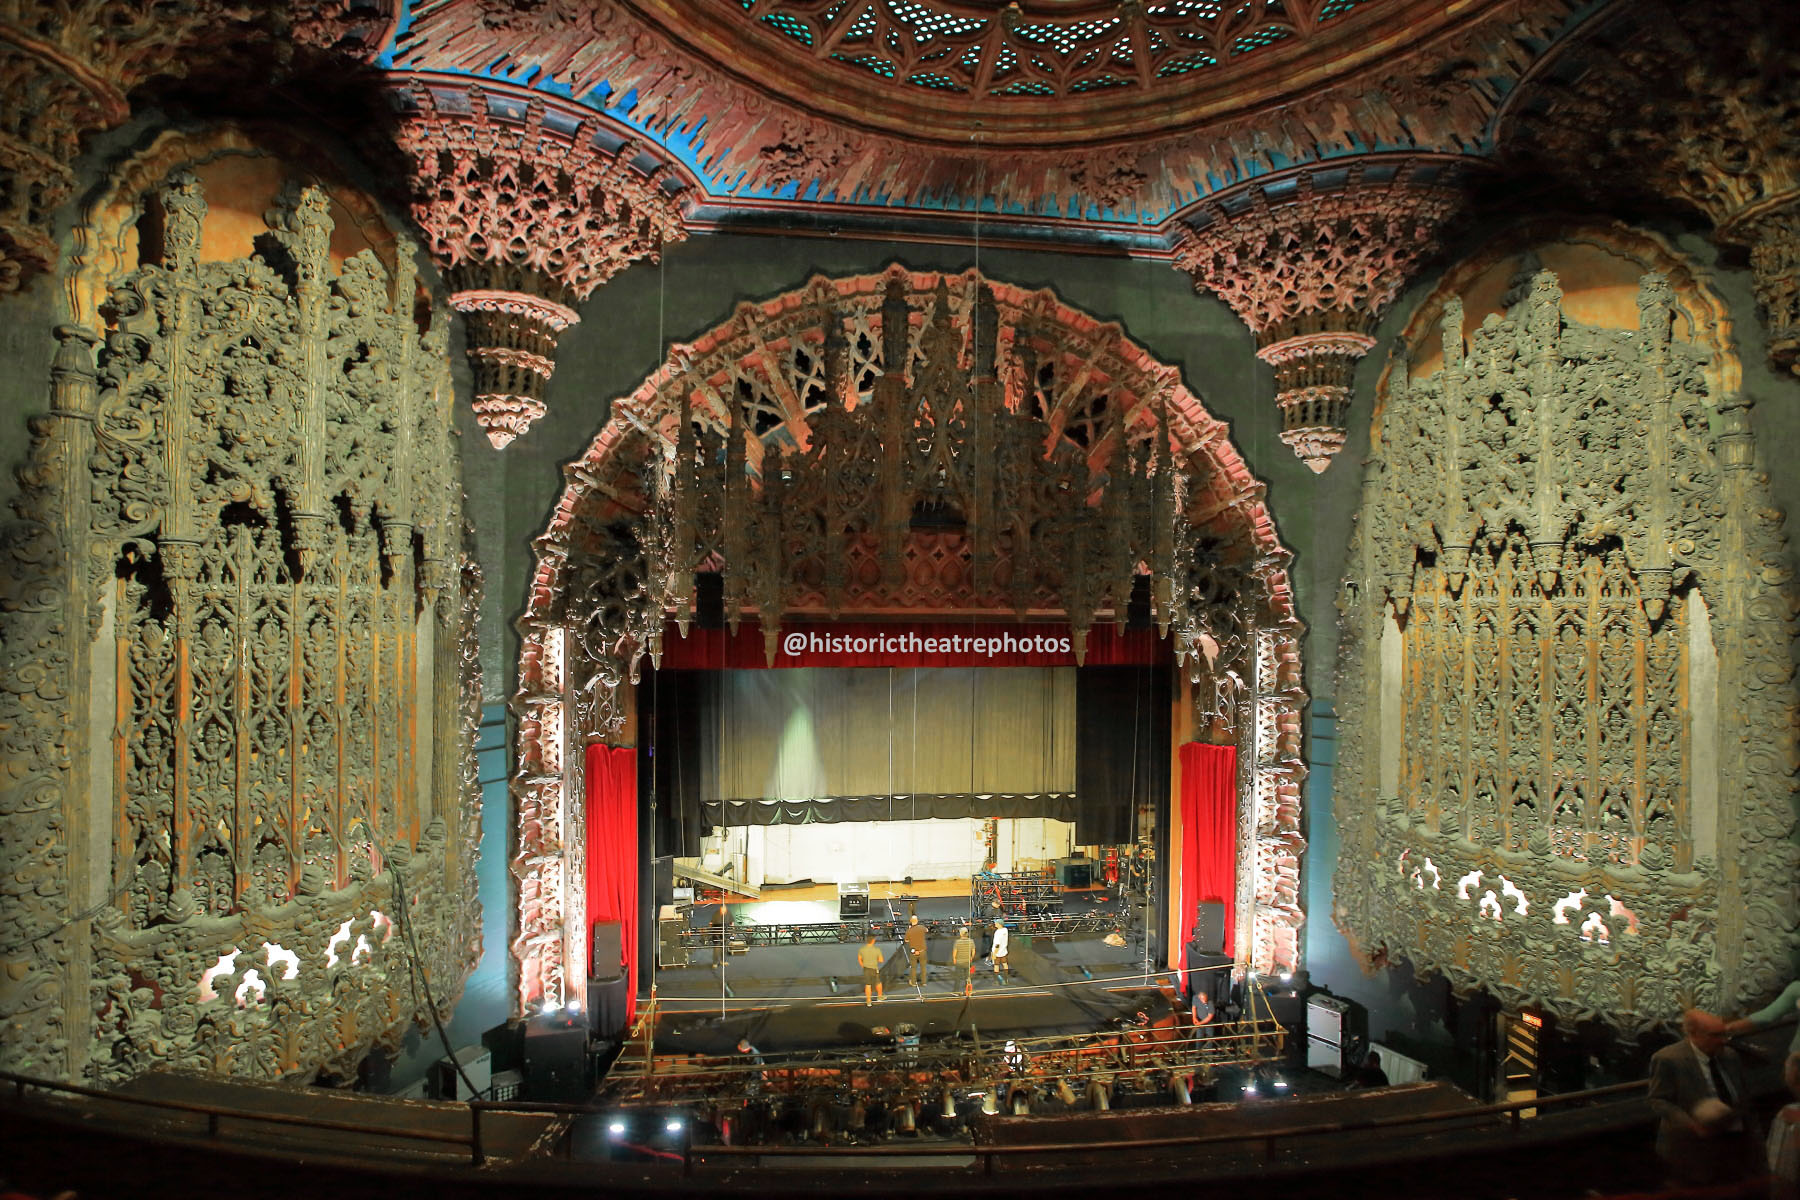 Organ grilles flanking the stage